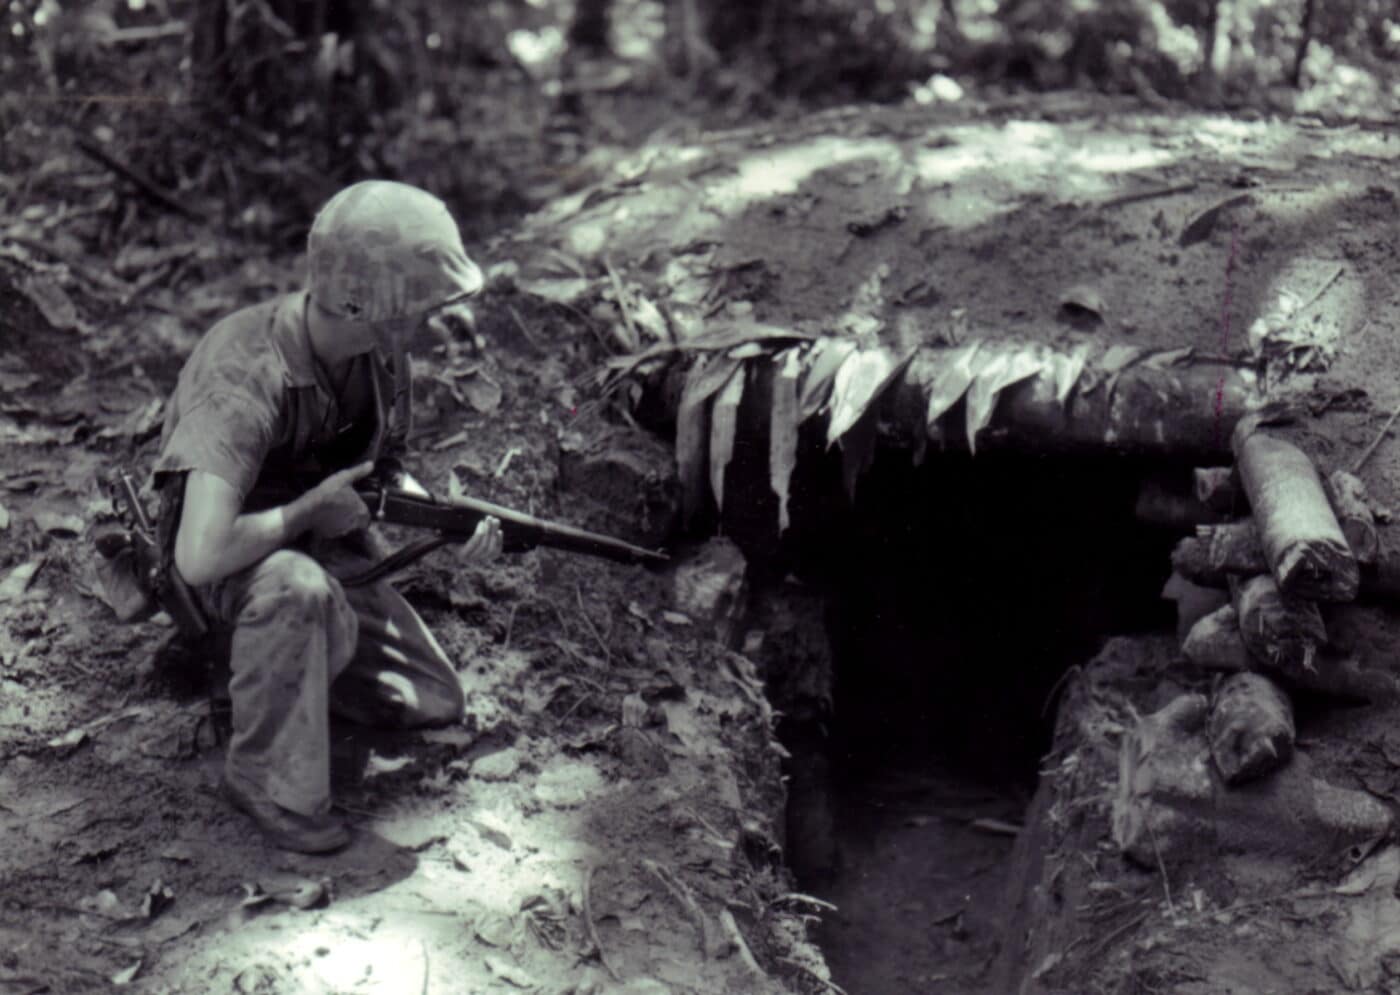 A U.S. Marine examines a Japanese bunker on Bougainville Island in 1944 while holding an M1903A3 rifle